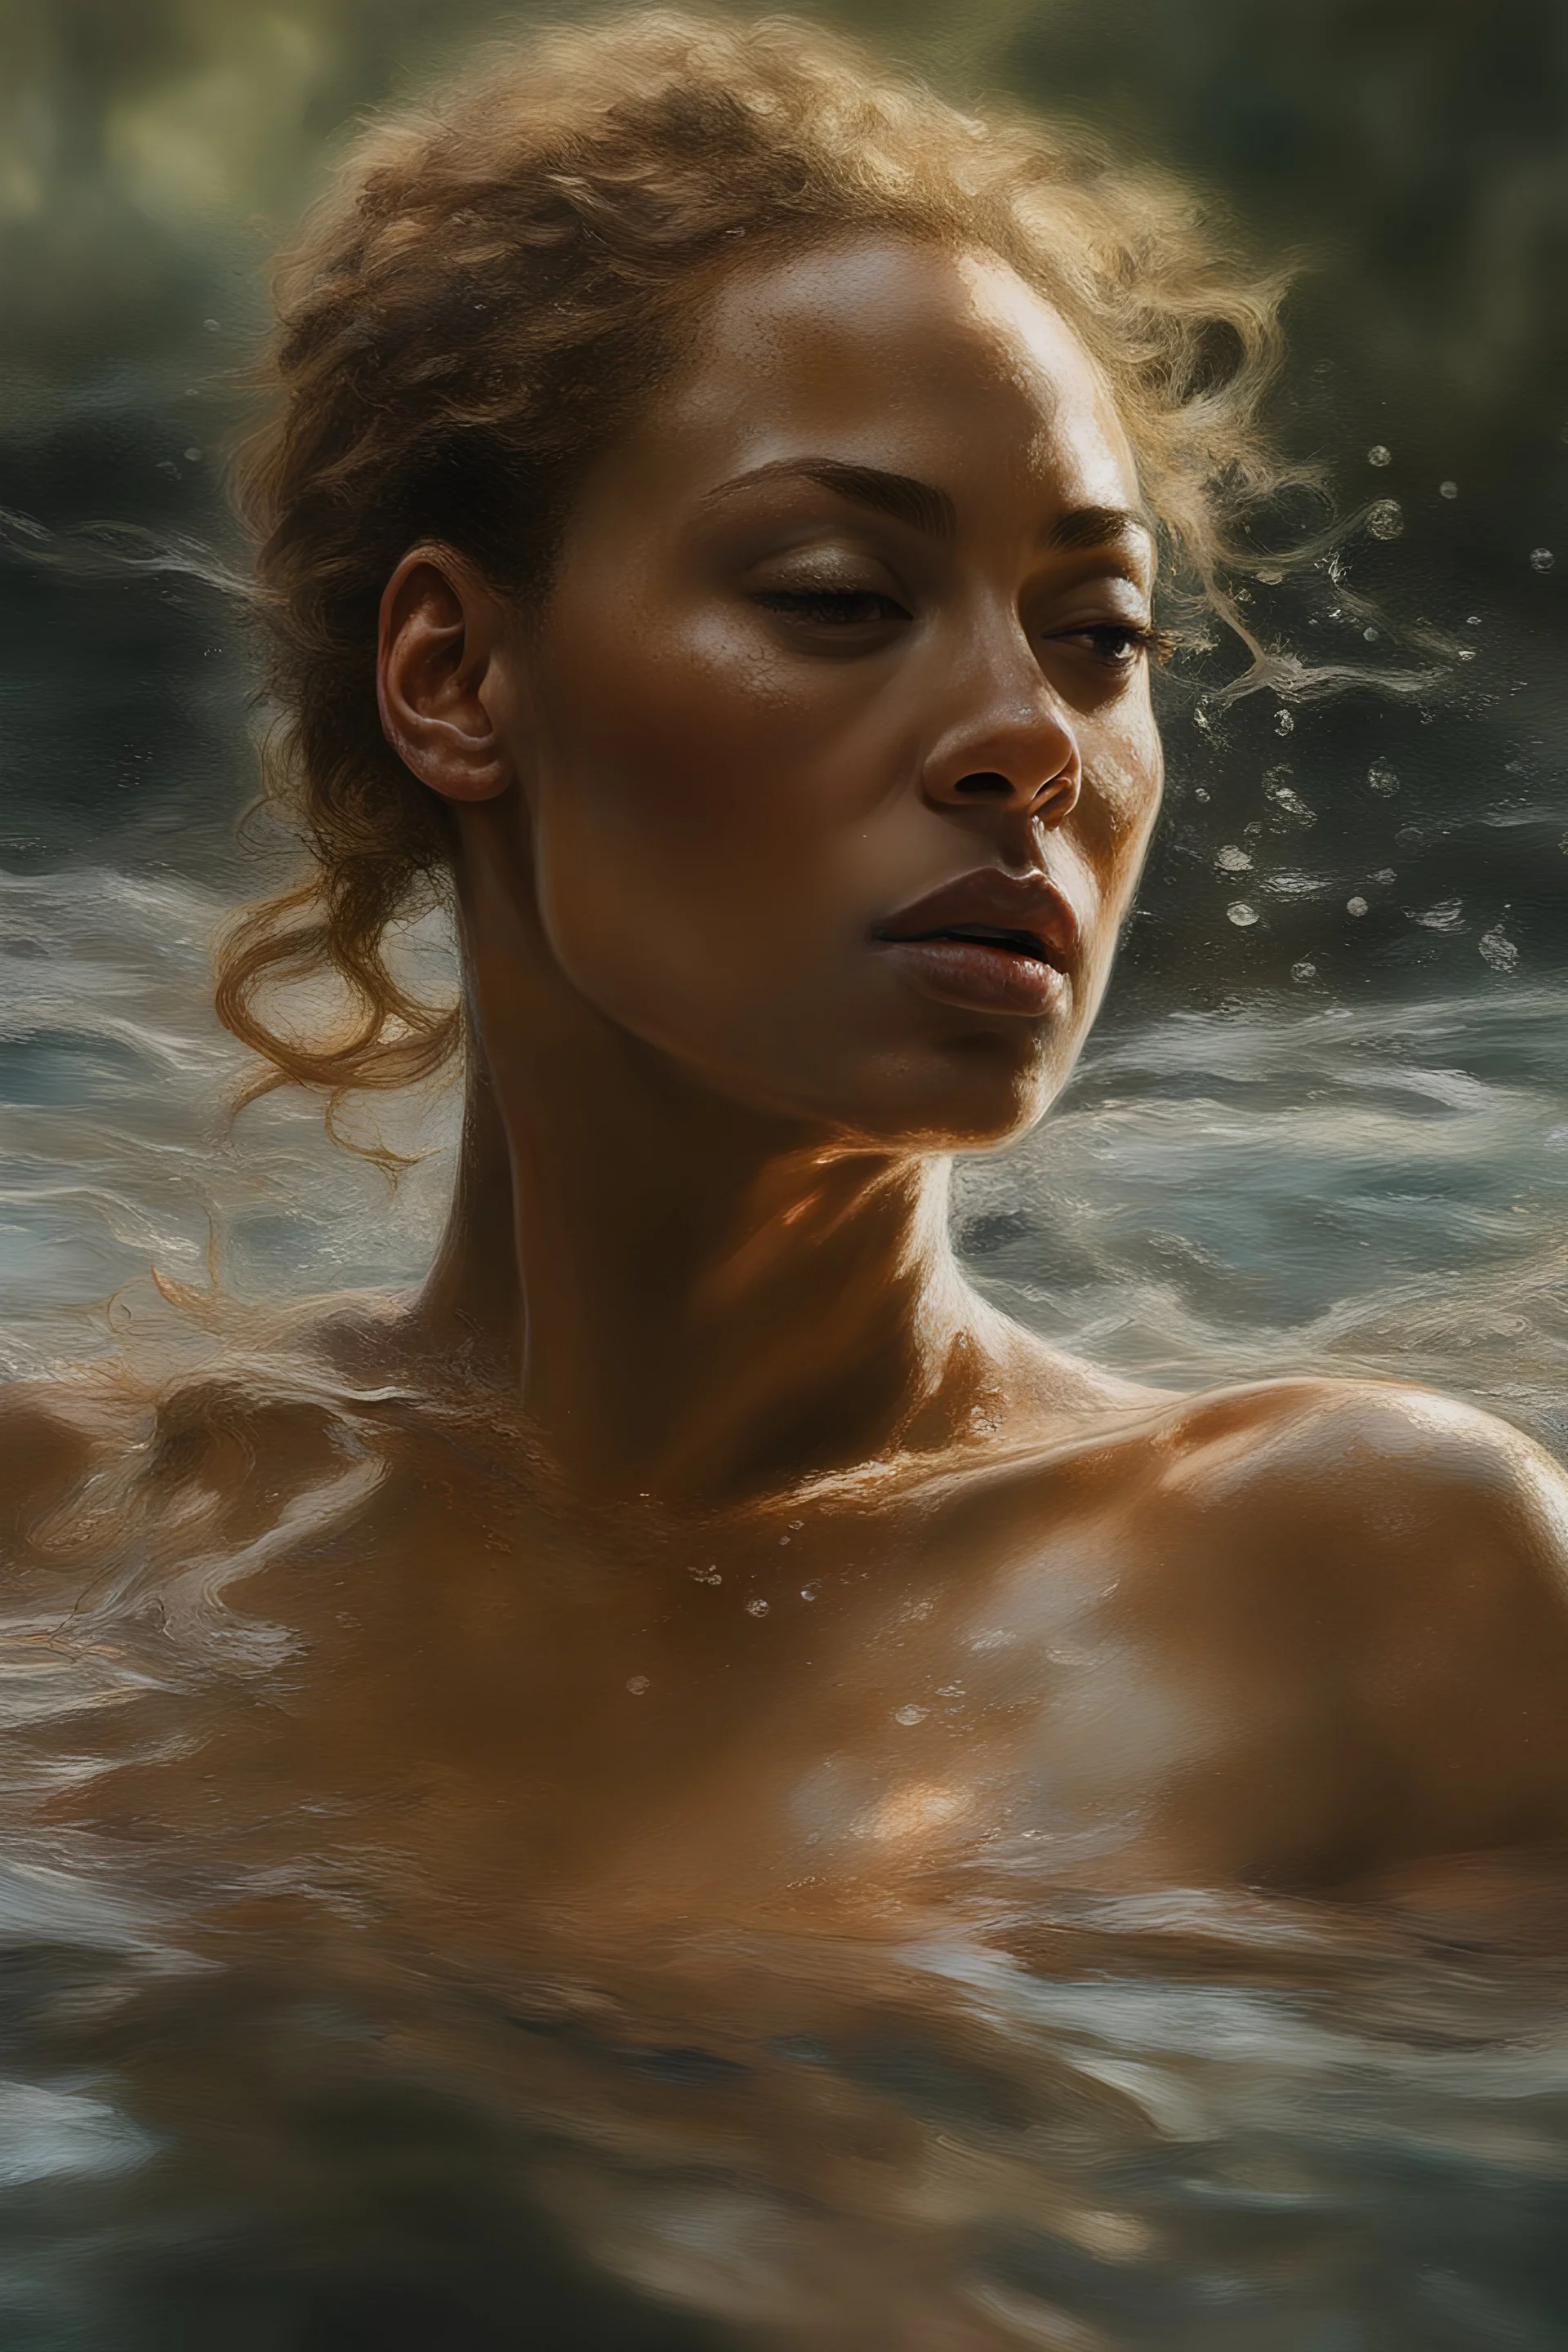 beyoncé Close-up, photorealistic portrait blends figure seamlessly with natural environment, perfect anatomy under chiaroscuro lighting, Alyssa Monks' style, water, steam, and glass augmenting the figures, characters emerge as elements of wilderness, painters figures of loss, love, desire, hope, lush painterly surfaces, captivating colors and brushstrokes, HDR, RAW, photography by Jam Saudek, enig